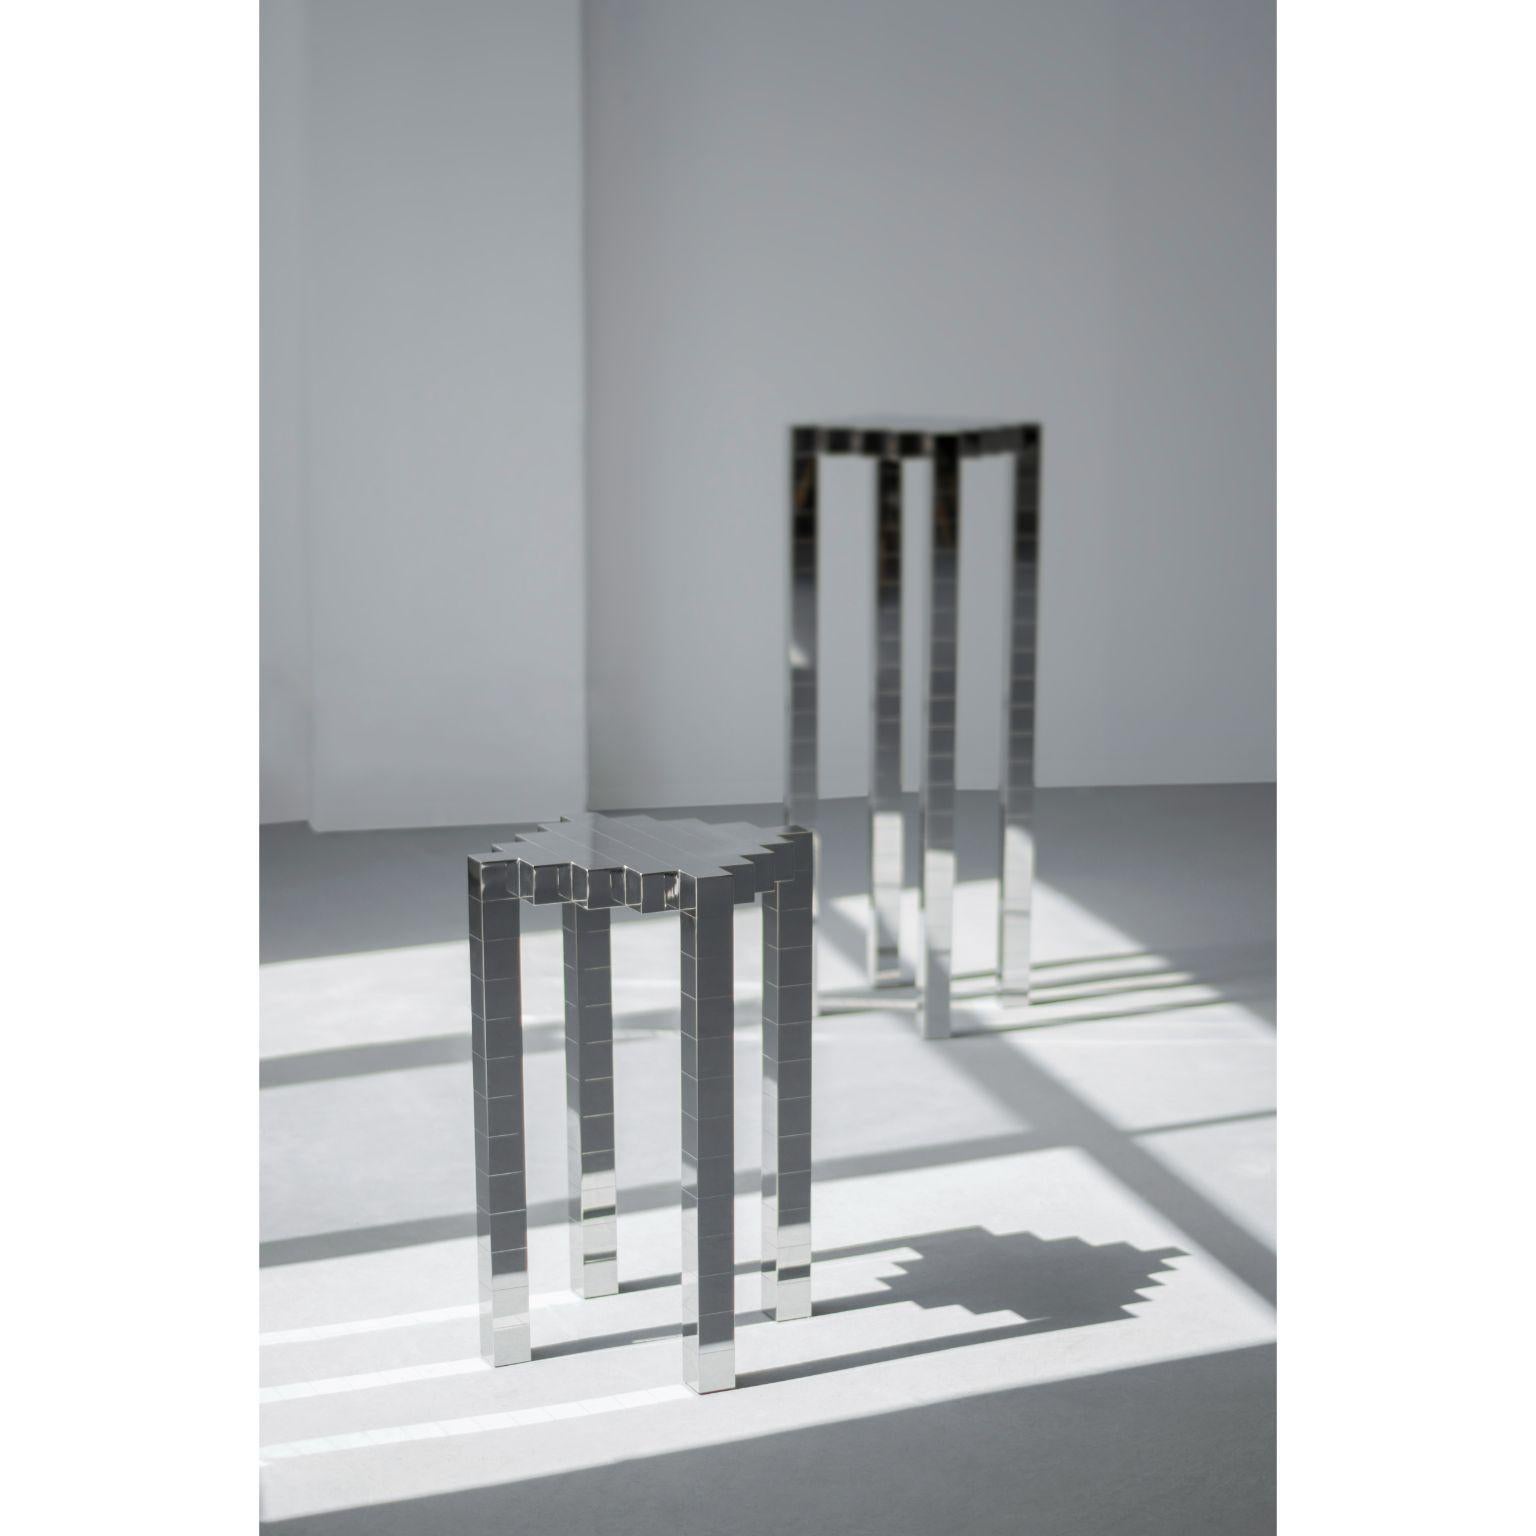 Set of 2 black ocean 2 and 3 stools by The Shaw
Dimensions: D32.5 x W 32.5 x H97 cm //D32.5 x W 32.5 x H60
Materials: Stainless Steel
Weight: 28 kg

B L A C K O C E A N 
I opened my eyes, it was still dark, the black water touched my face